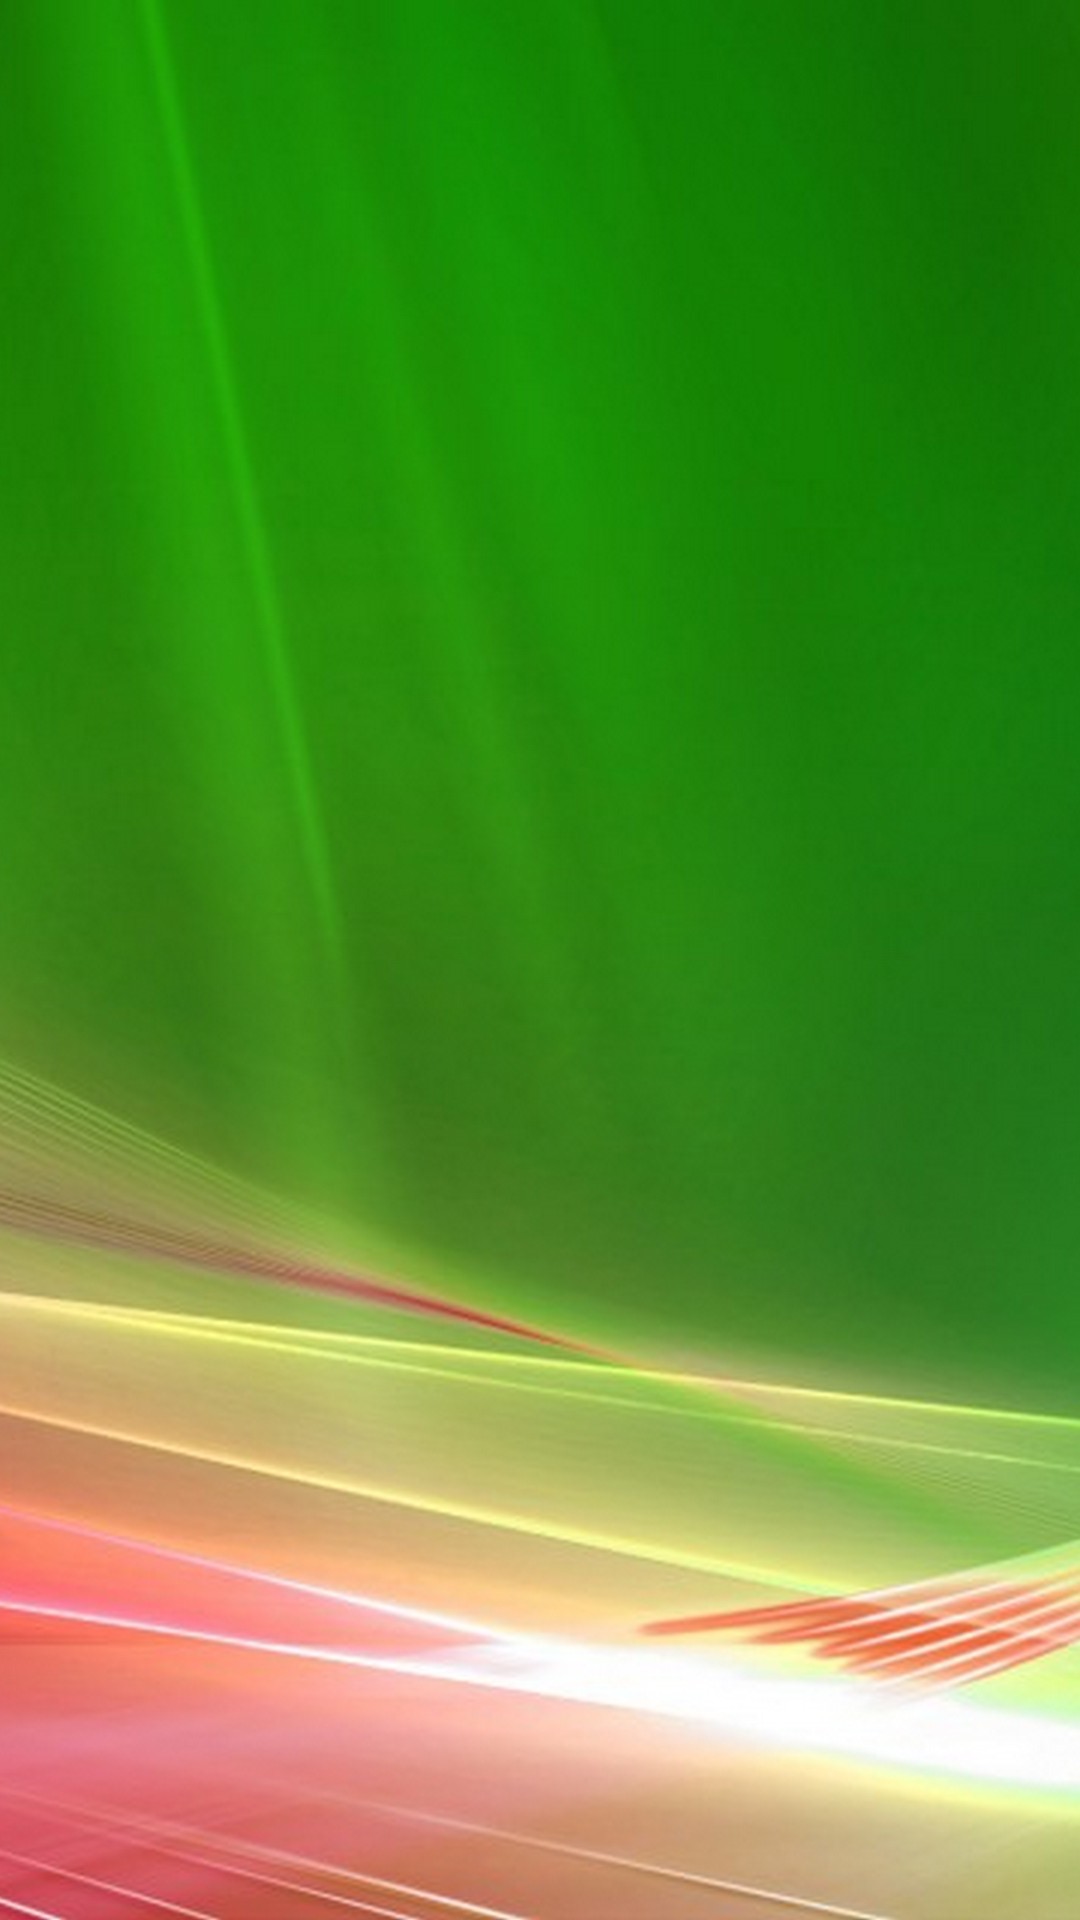 Light Green HD Wallpapers For Android with resolution 1080X1920 pixel. You can make this wallpaper for your Android backgrounds, Tablet, Smartphones Screensavers and Mobile Phone Lock Screen